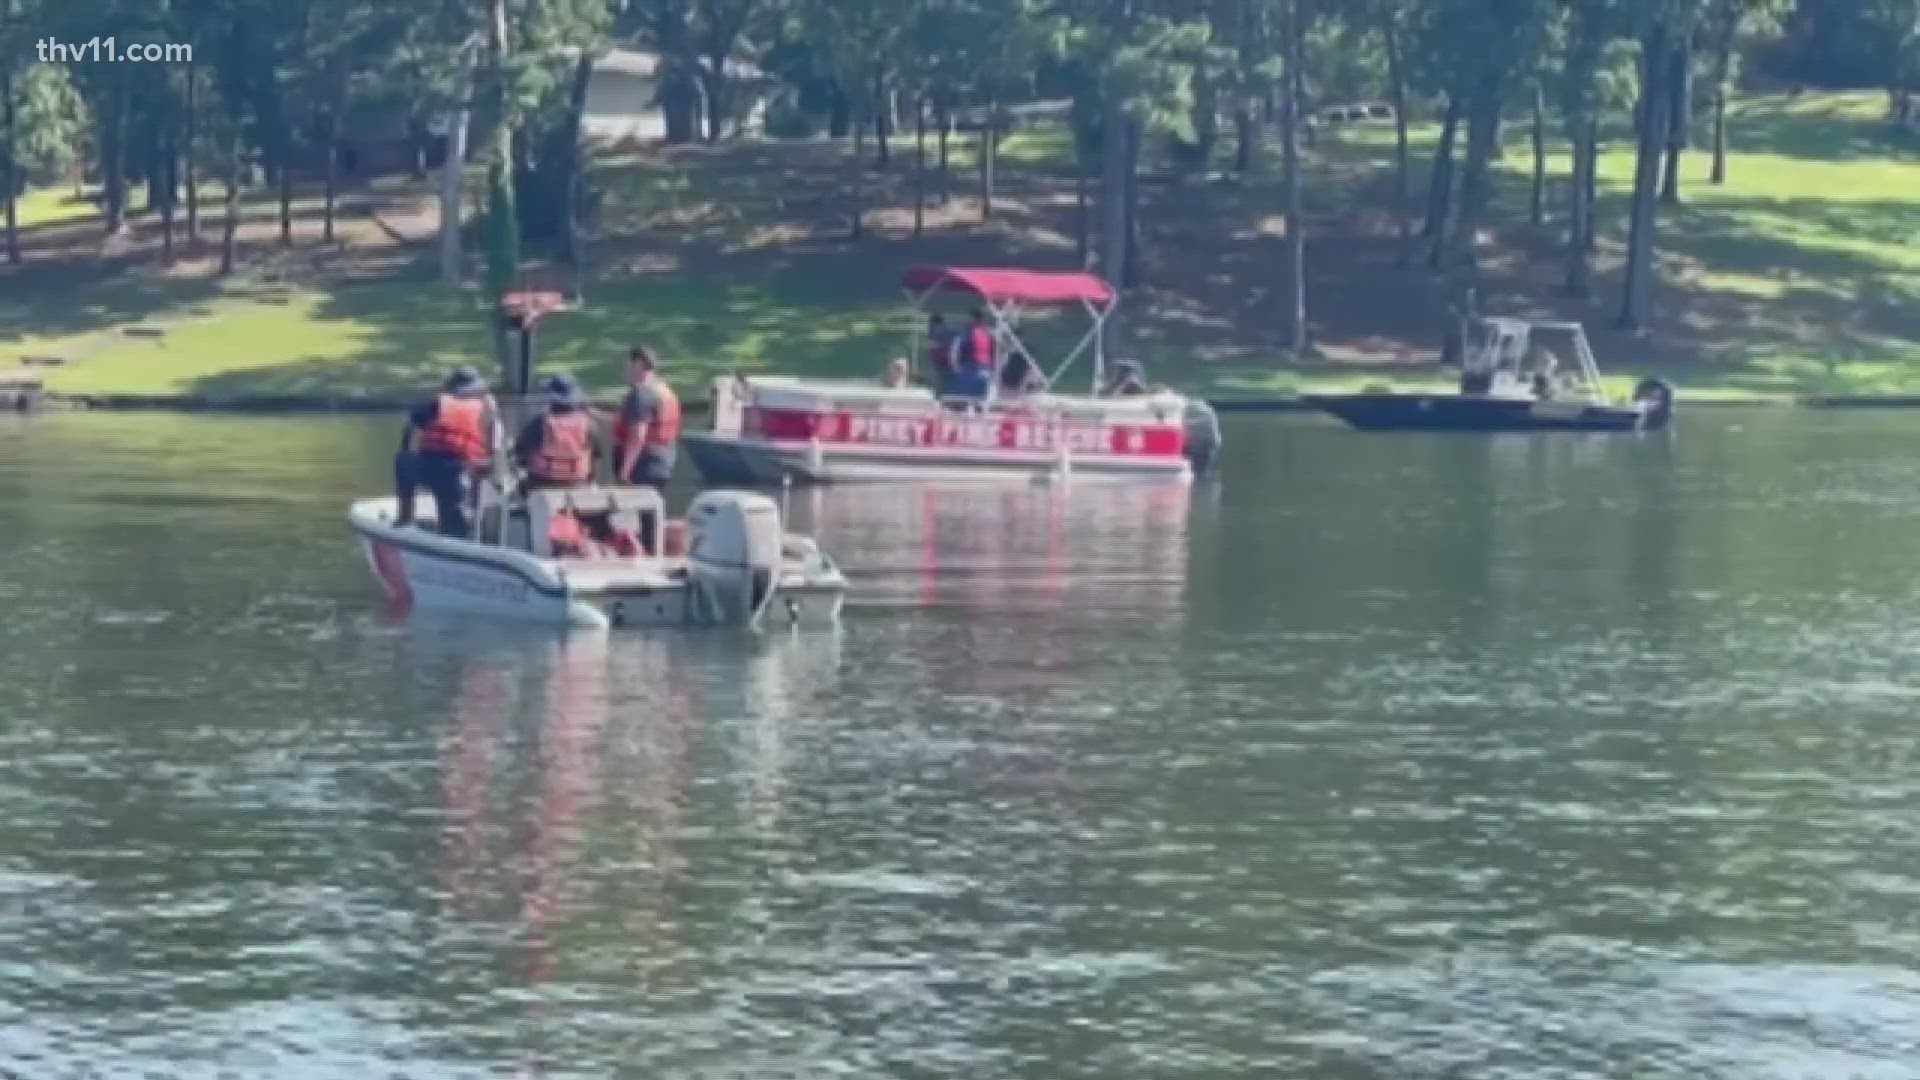 The Garland County Sheriff's Office has confirmed that a plane crashed into the water on Lake Hamilton in Hot Springs.